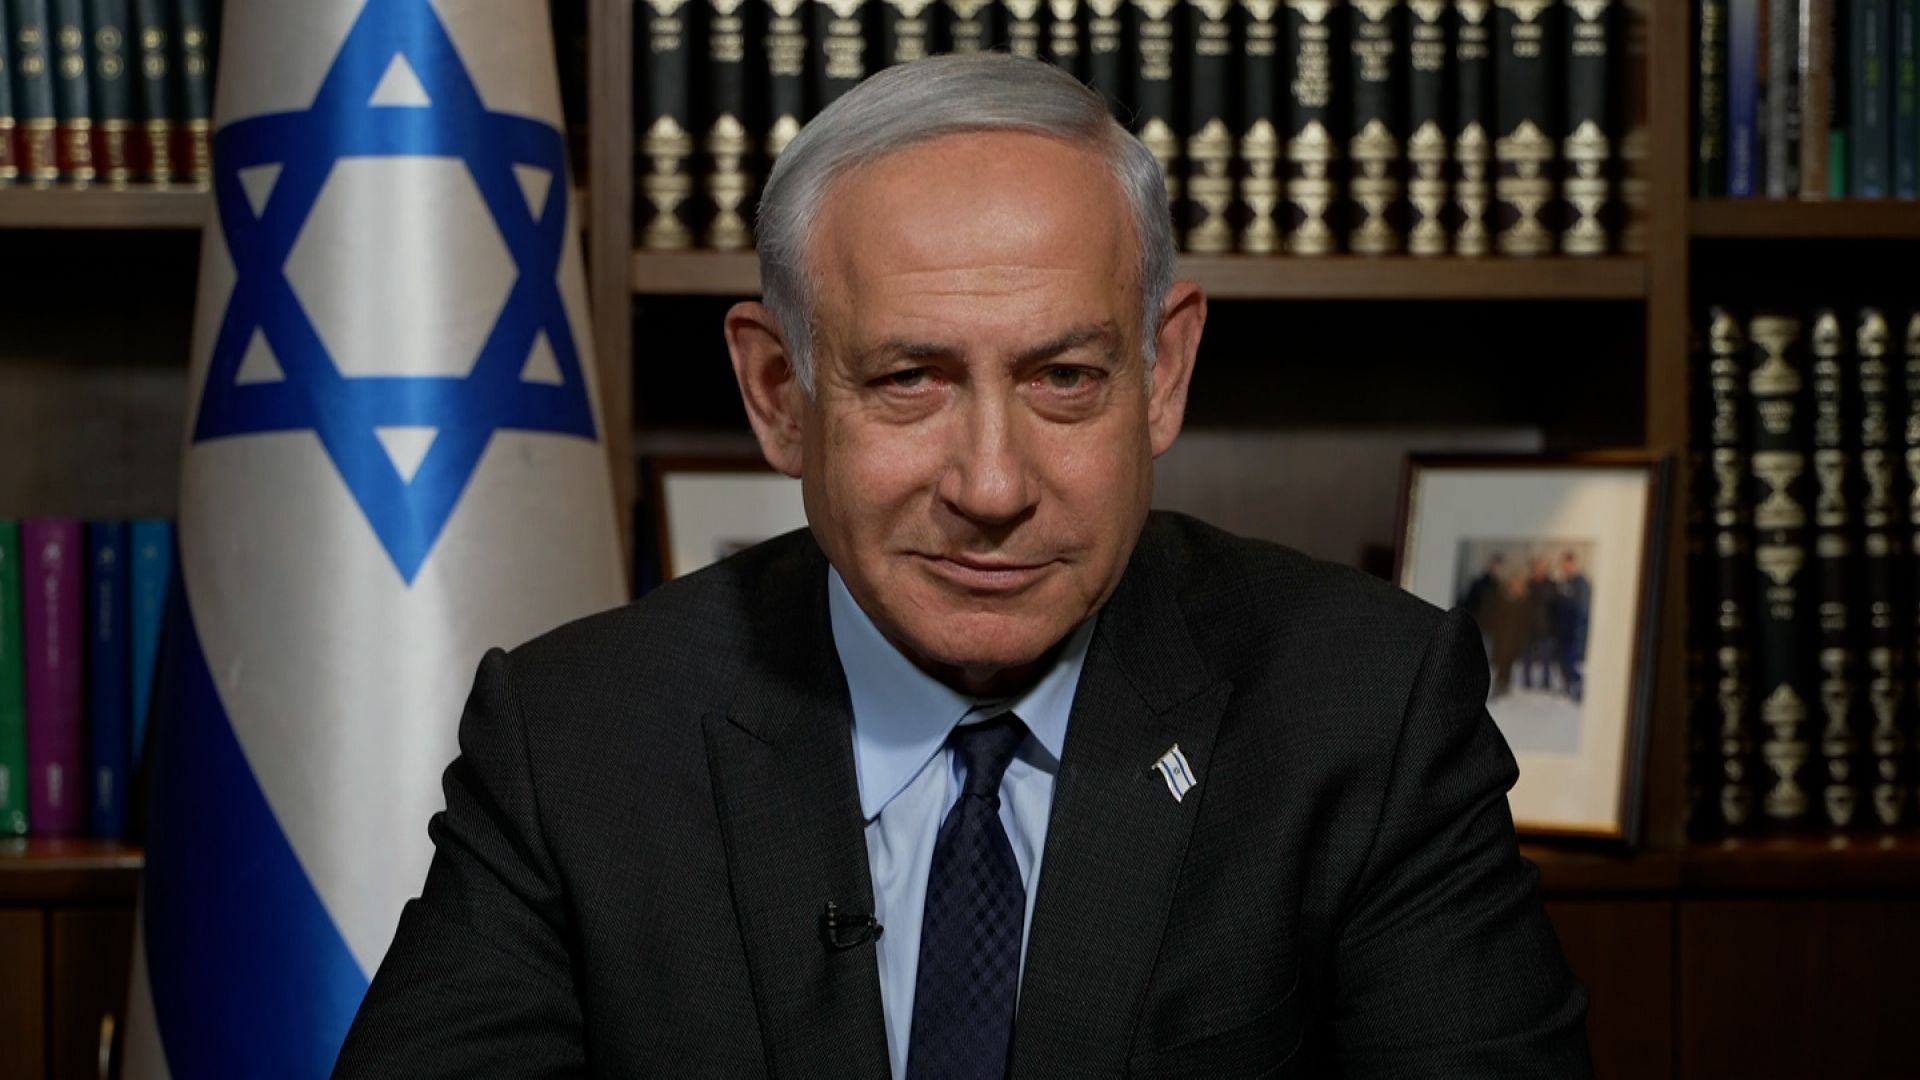 Israeli Prime Minister warns against overturning  controversial judiciary laws